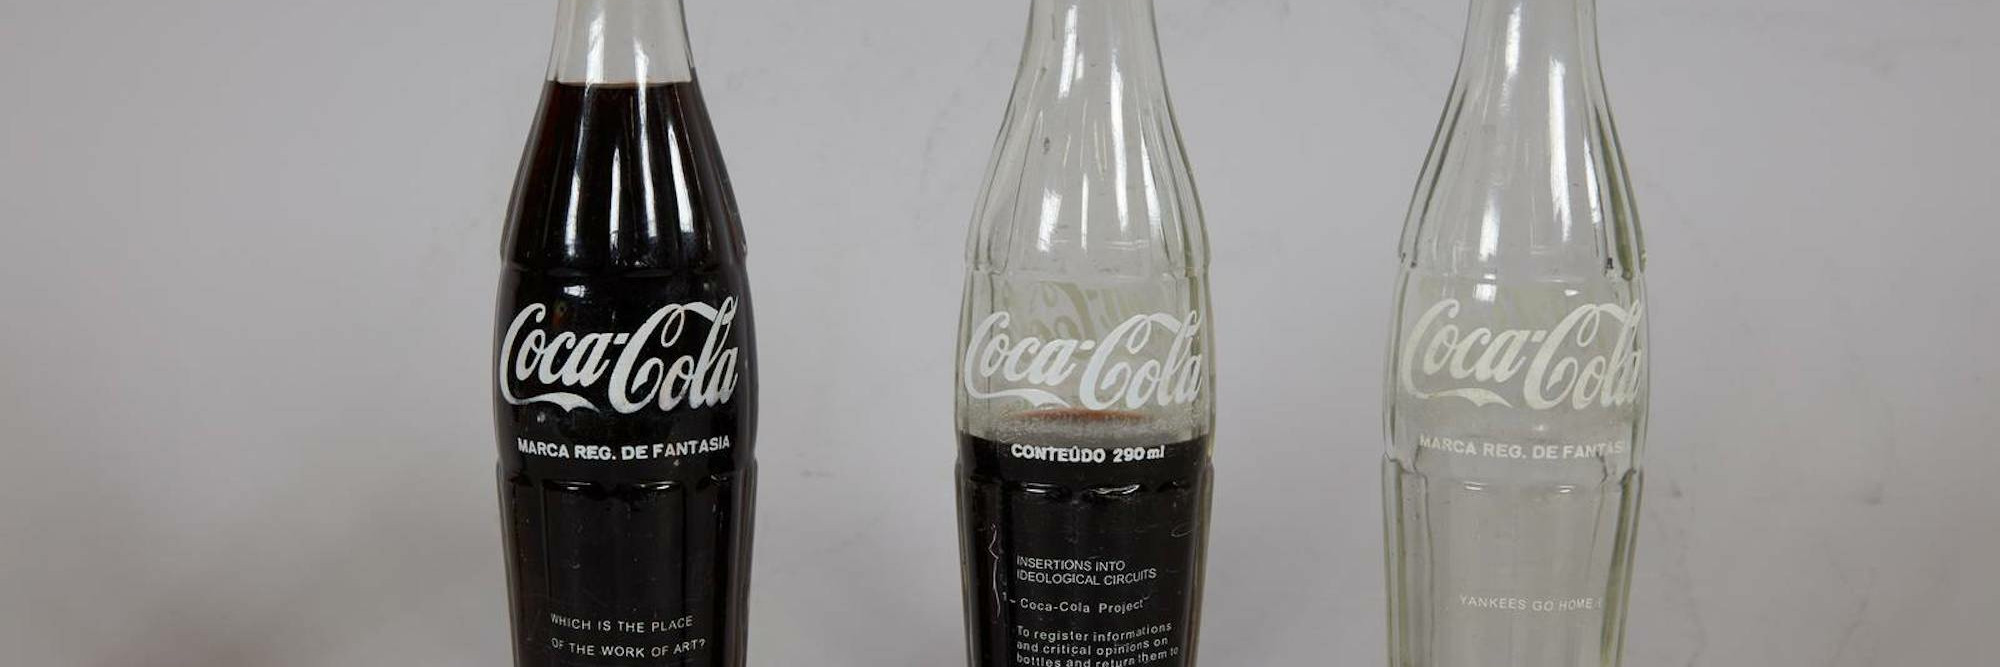 Cildo Meireles. INSERTIONS INTO IDEOLOGICAL CIRCUITS: 1. COCA-COLA PROJECT (INSERÇÕES EM CIRCUITOS IDEOLÓGICOS: 1. PROJETO COCA-COLA). 1970. Printed pressure-sensitive labels on three commercial glass bottles, dimensions variable. Gift of Lilian Tone.